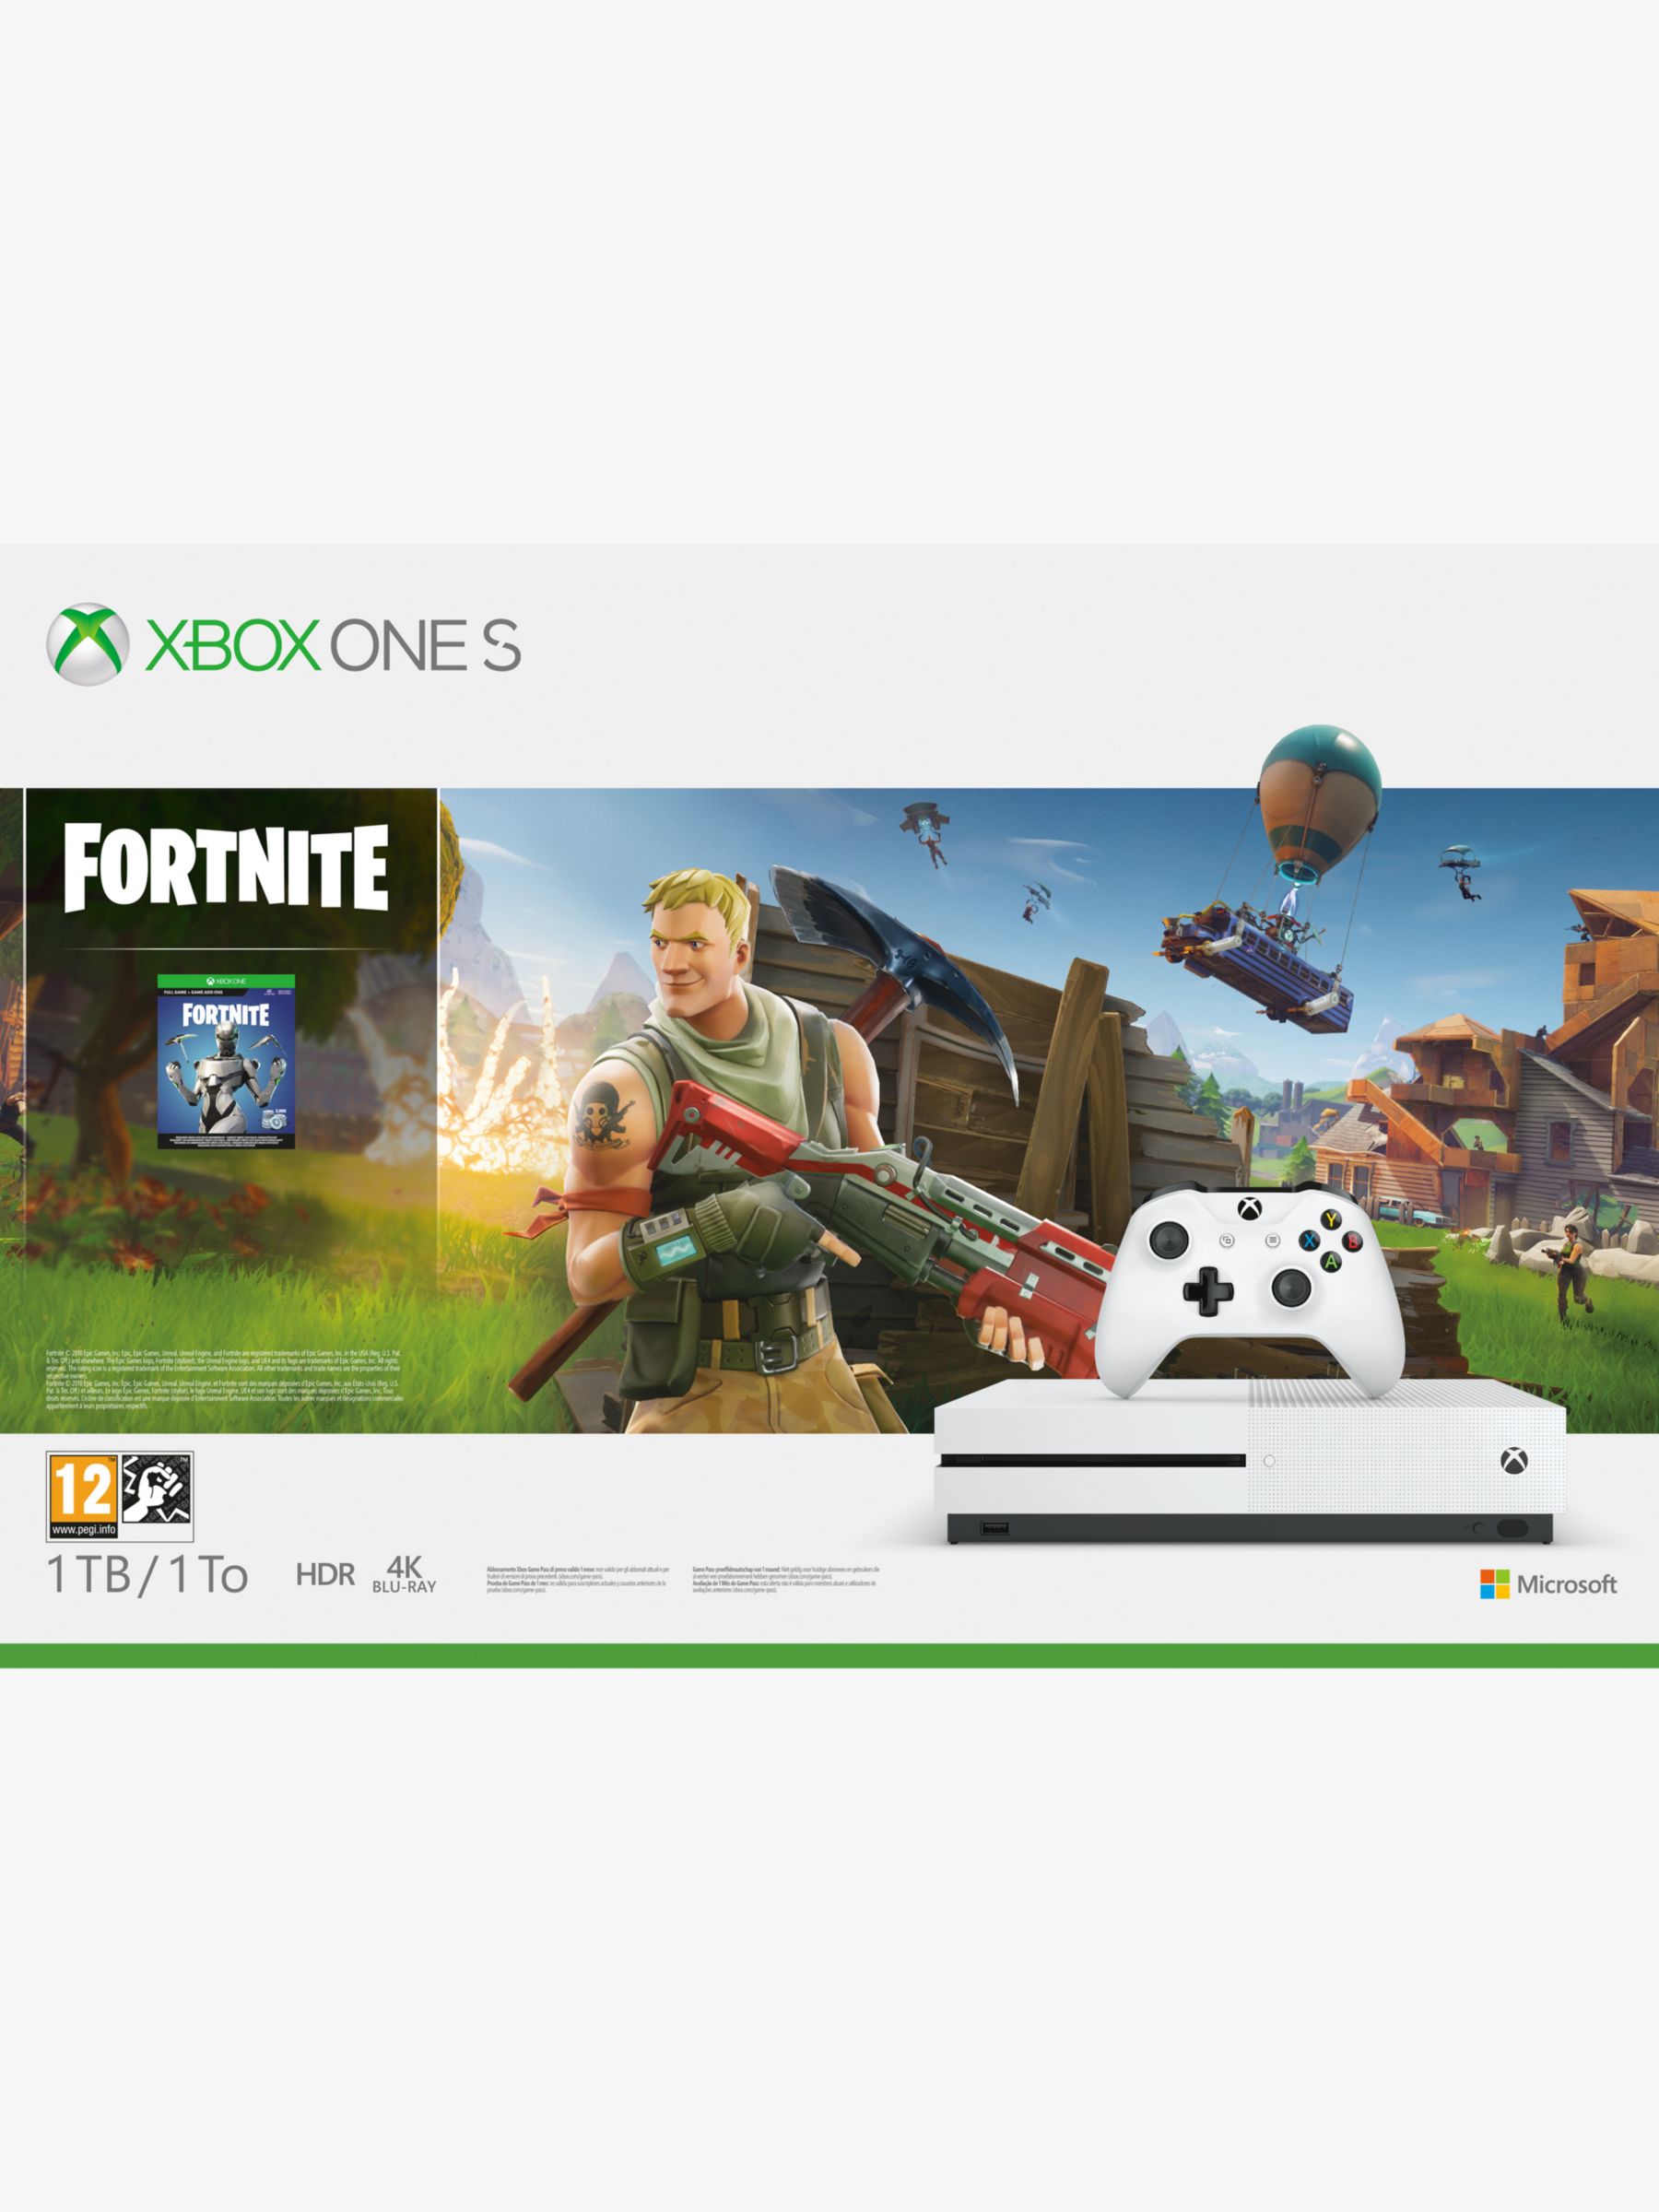 buy microsoft xbox one s console 1tb with wireless controller and fortnite game bundle - fortnite couch co op xbox one